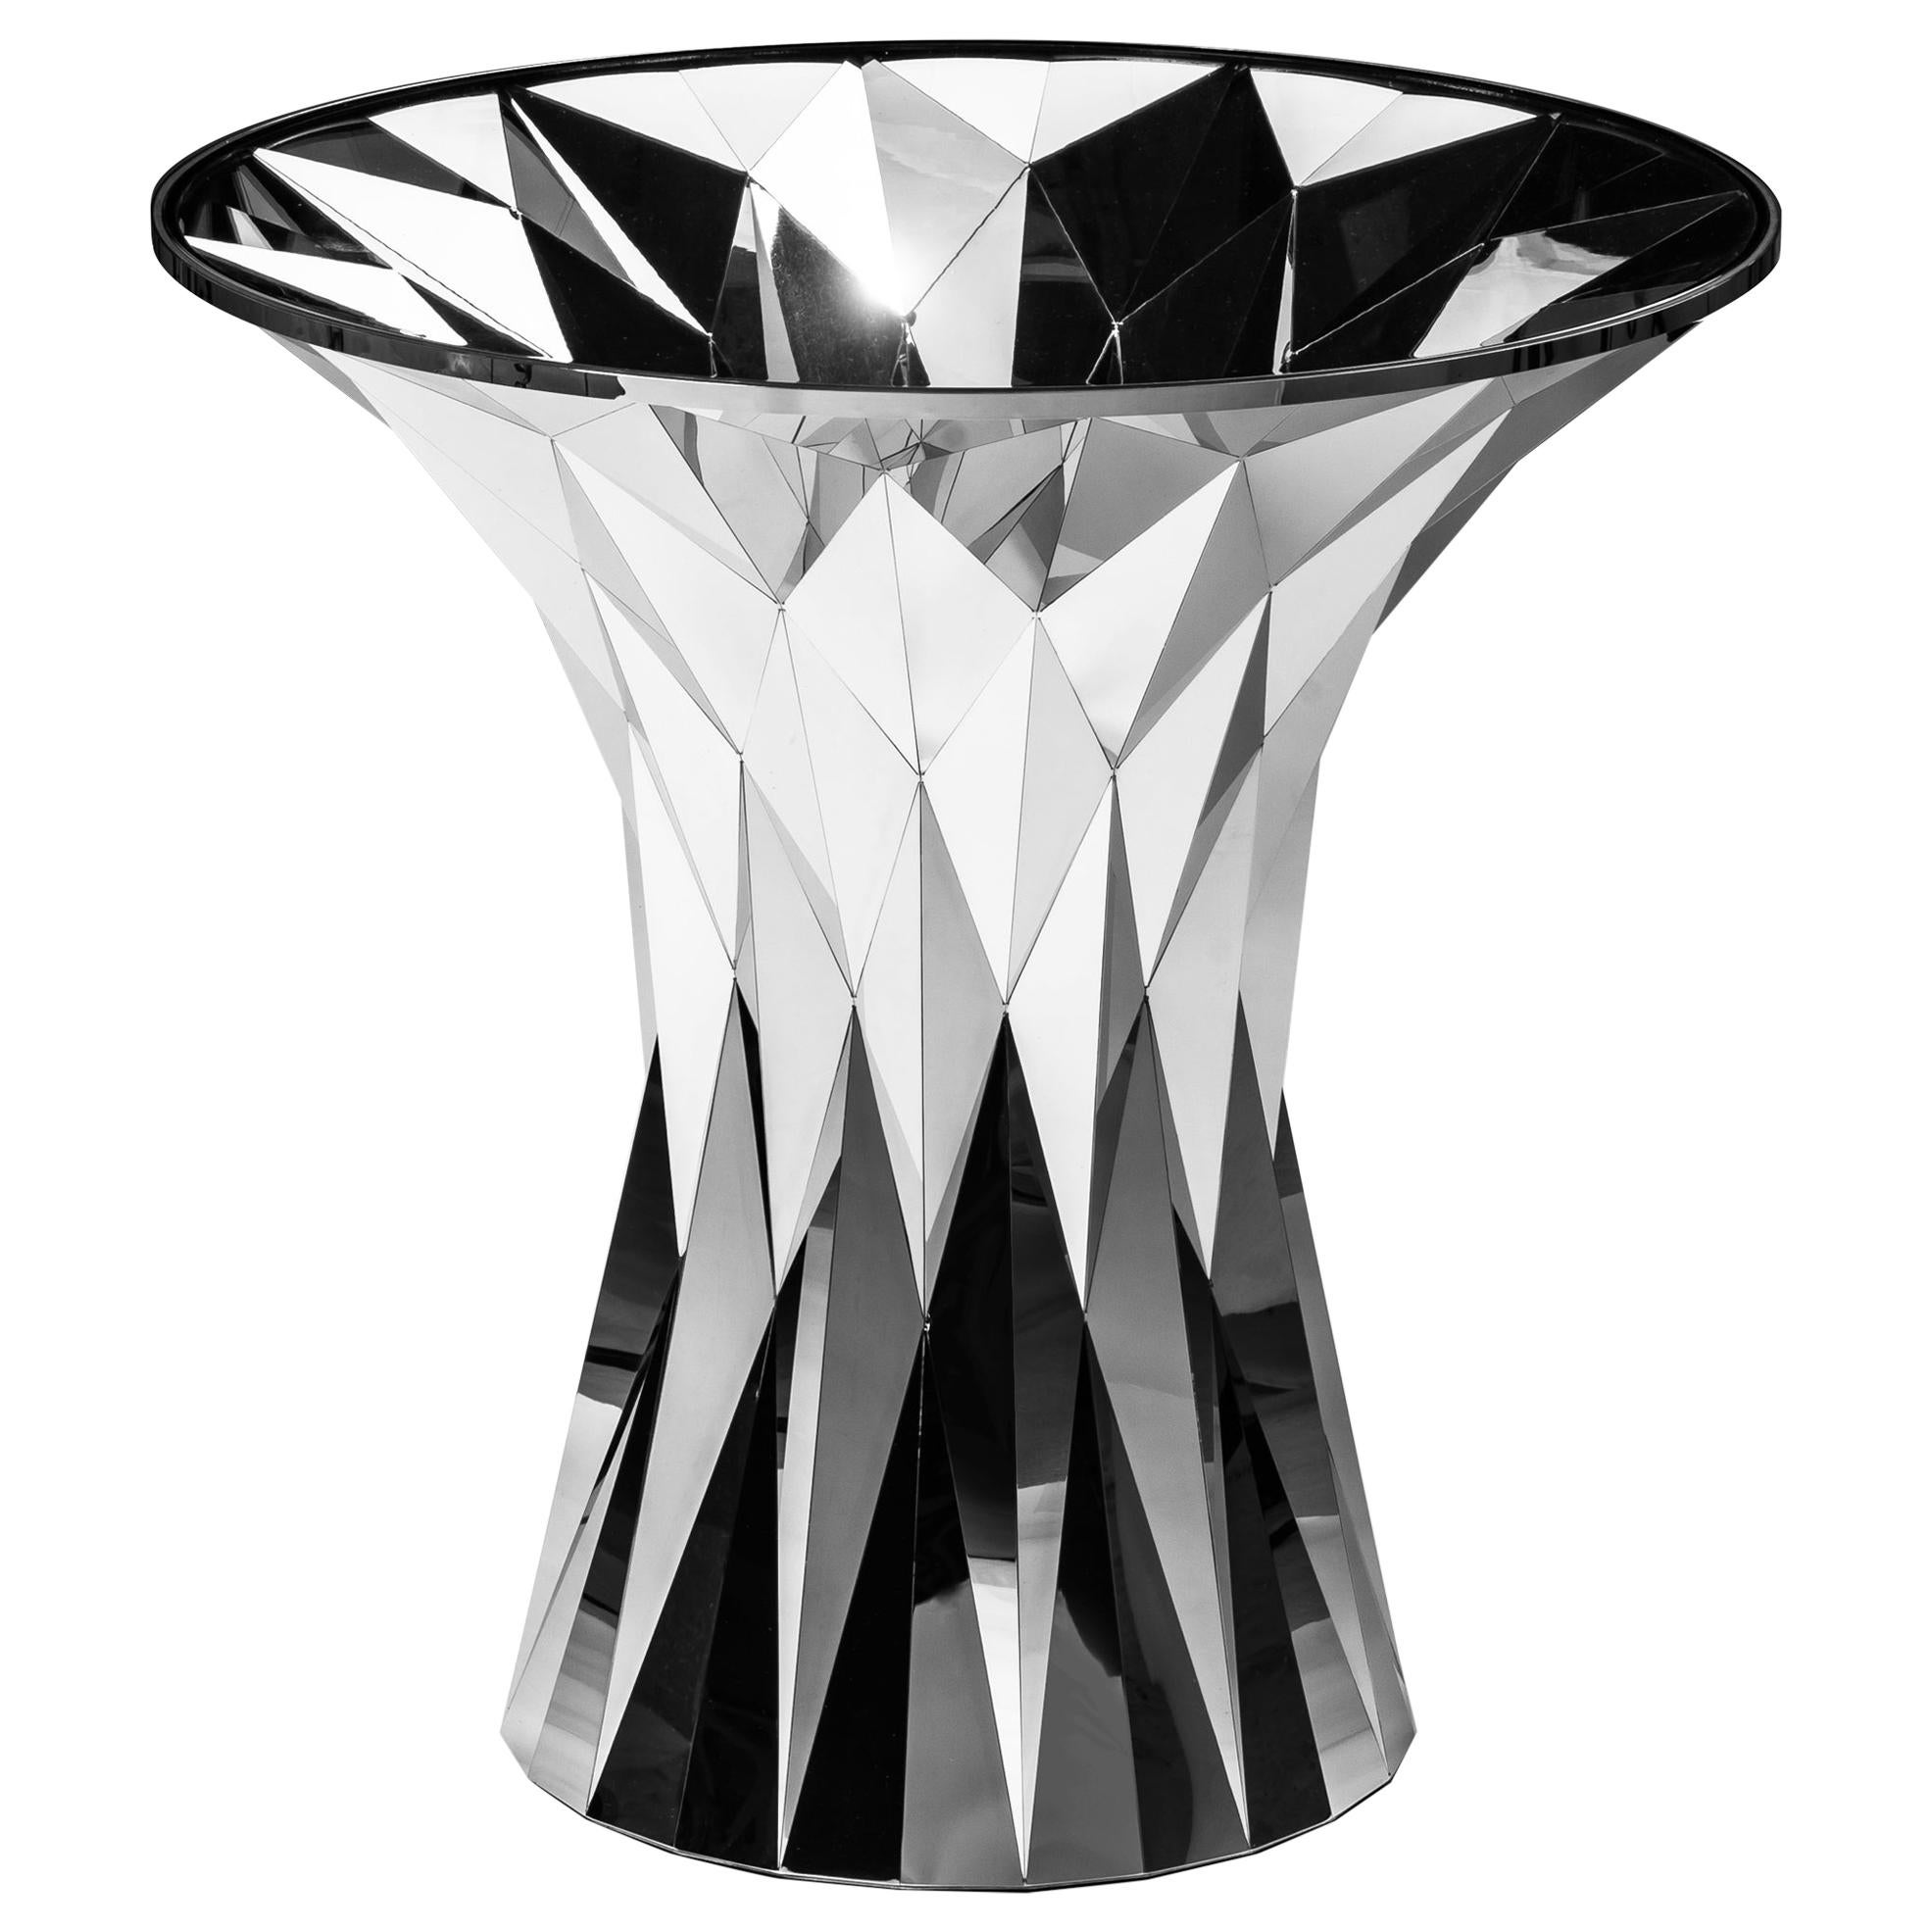 Object #MT-T3-S-S Mirror Polished Stainless Steel Table by Zhoujie Zhang